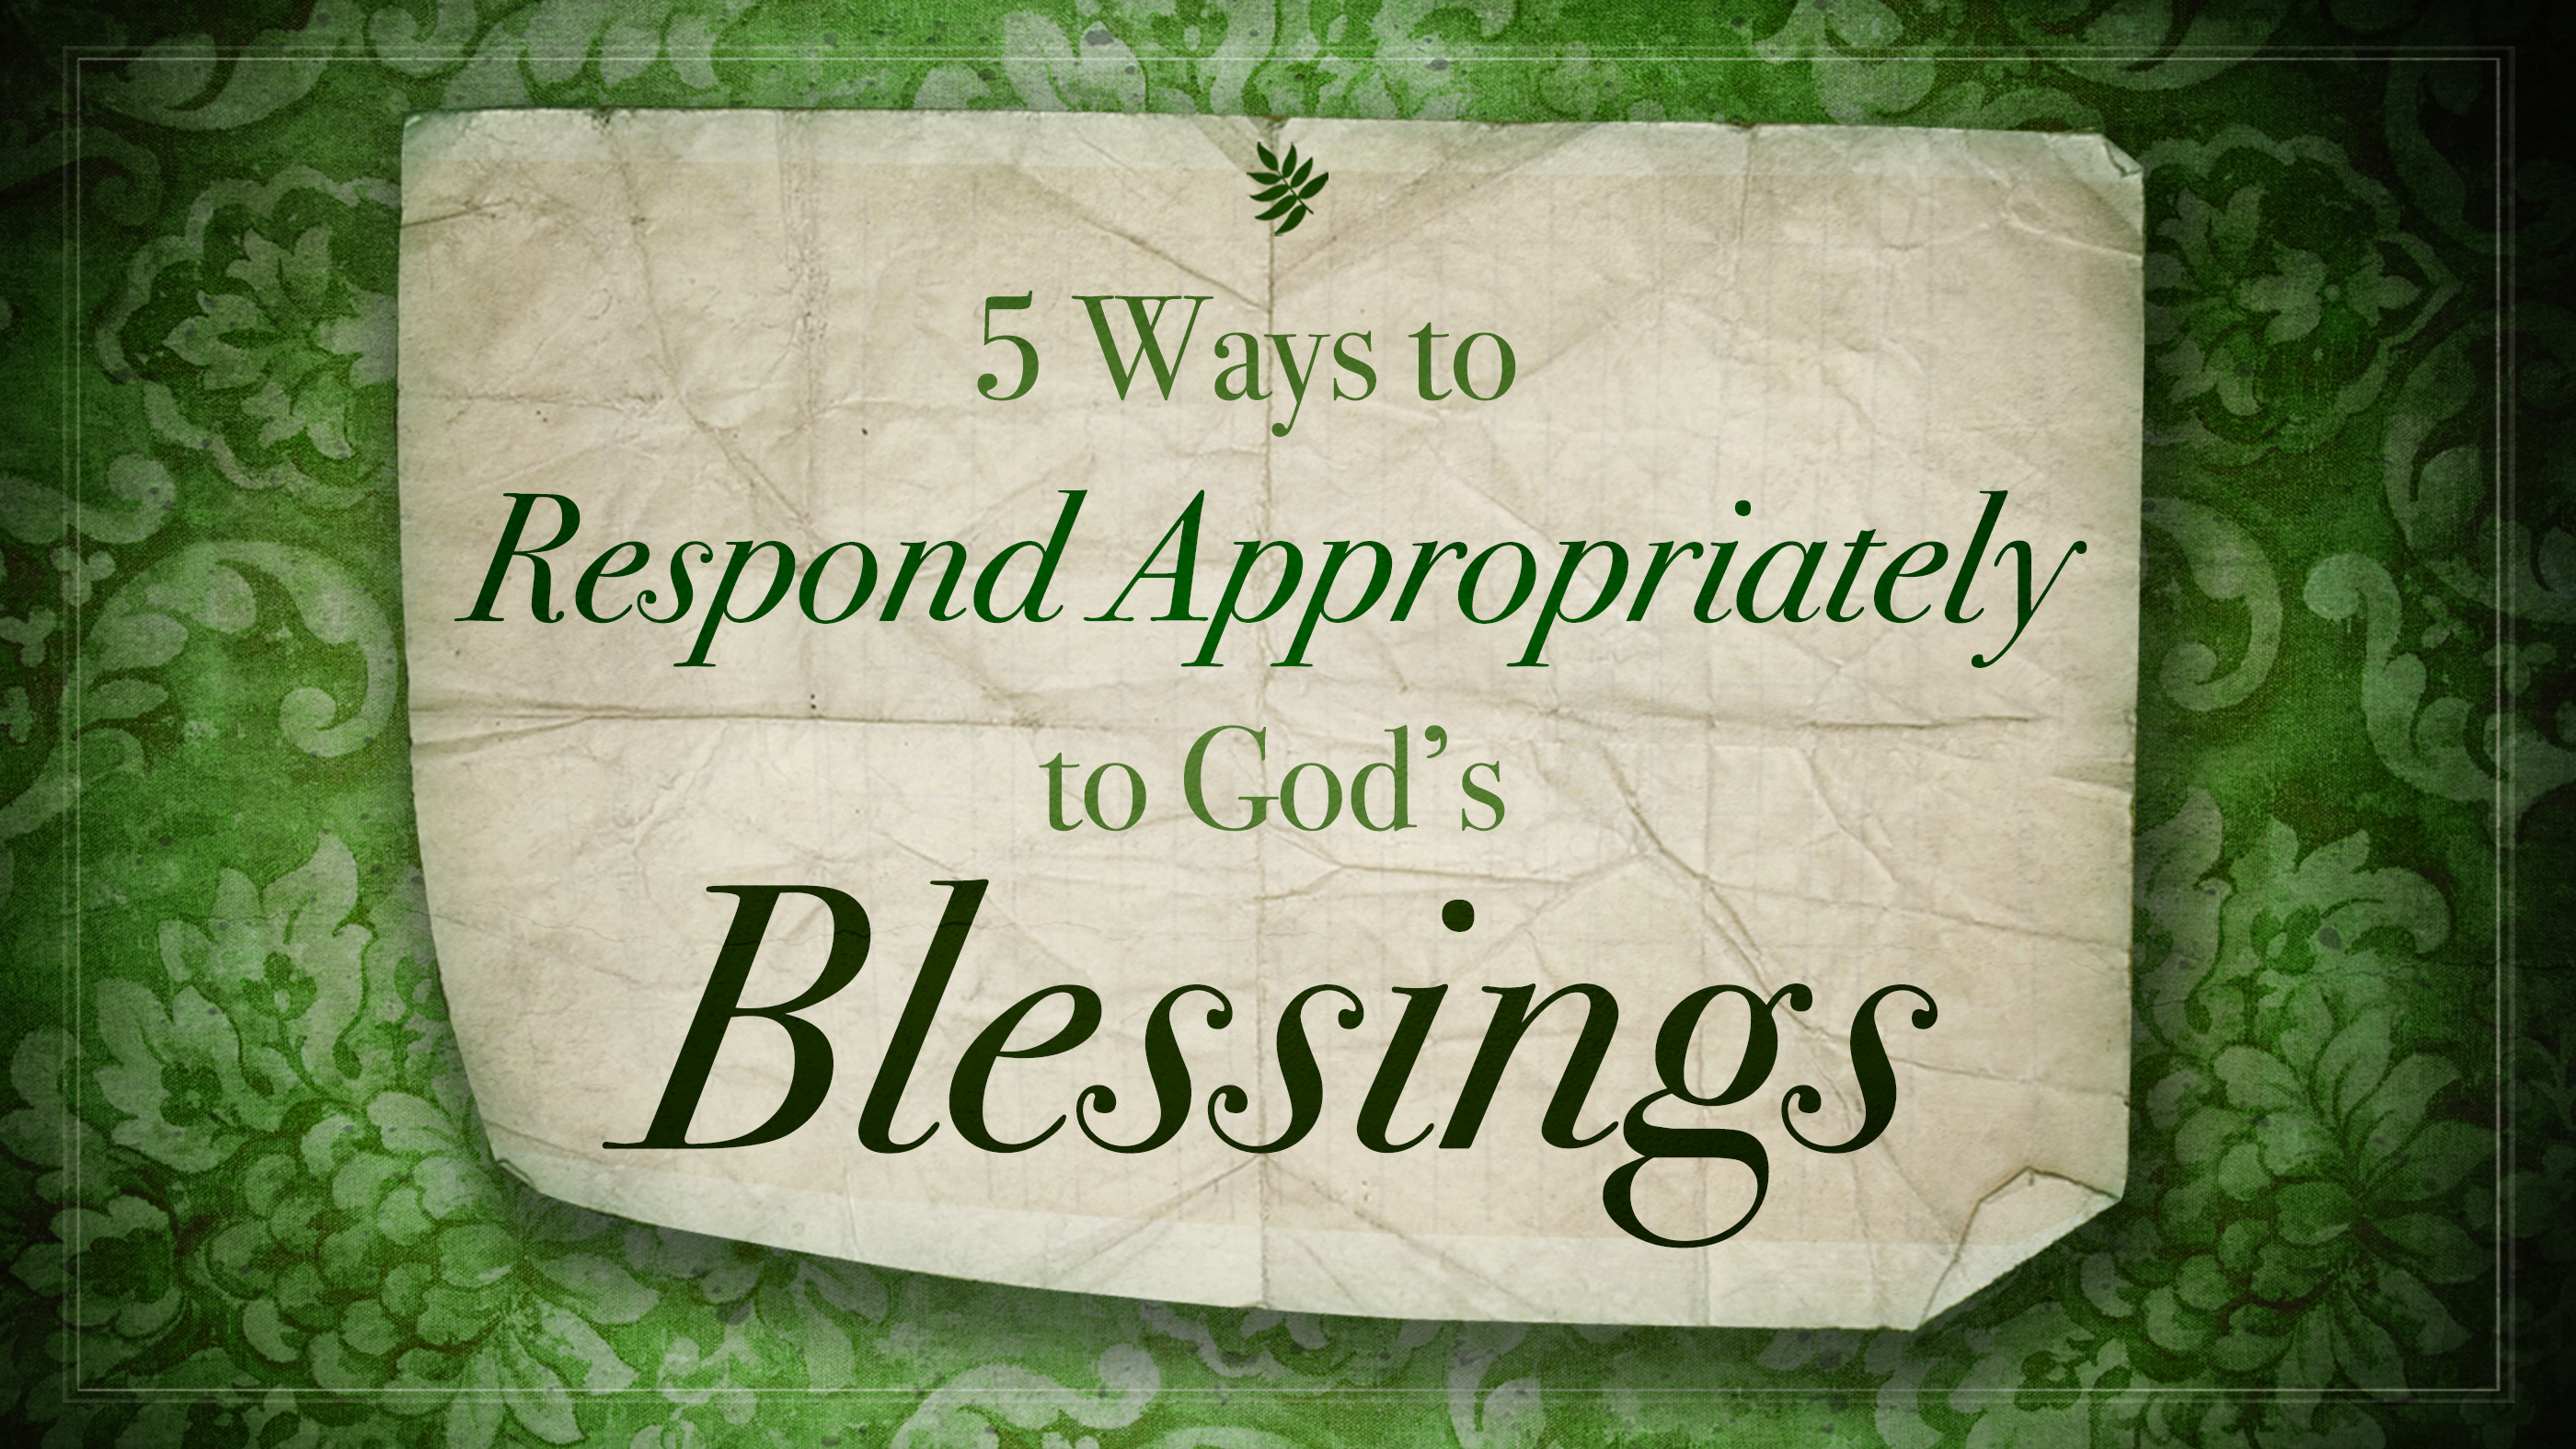 5-ways-to-respond-appropriately-to-gods-blessings-banner